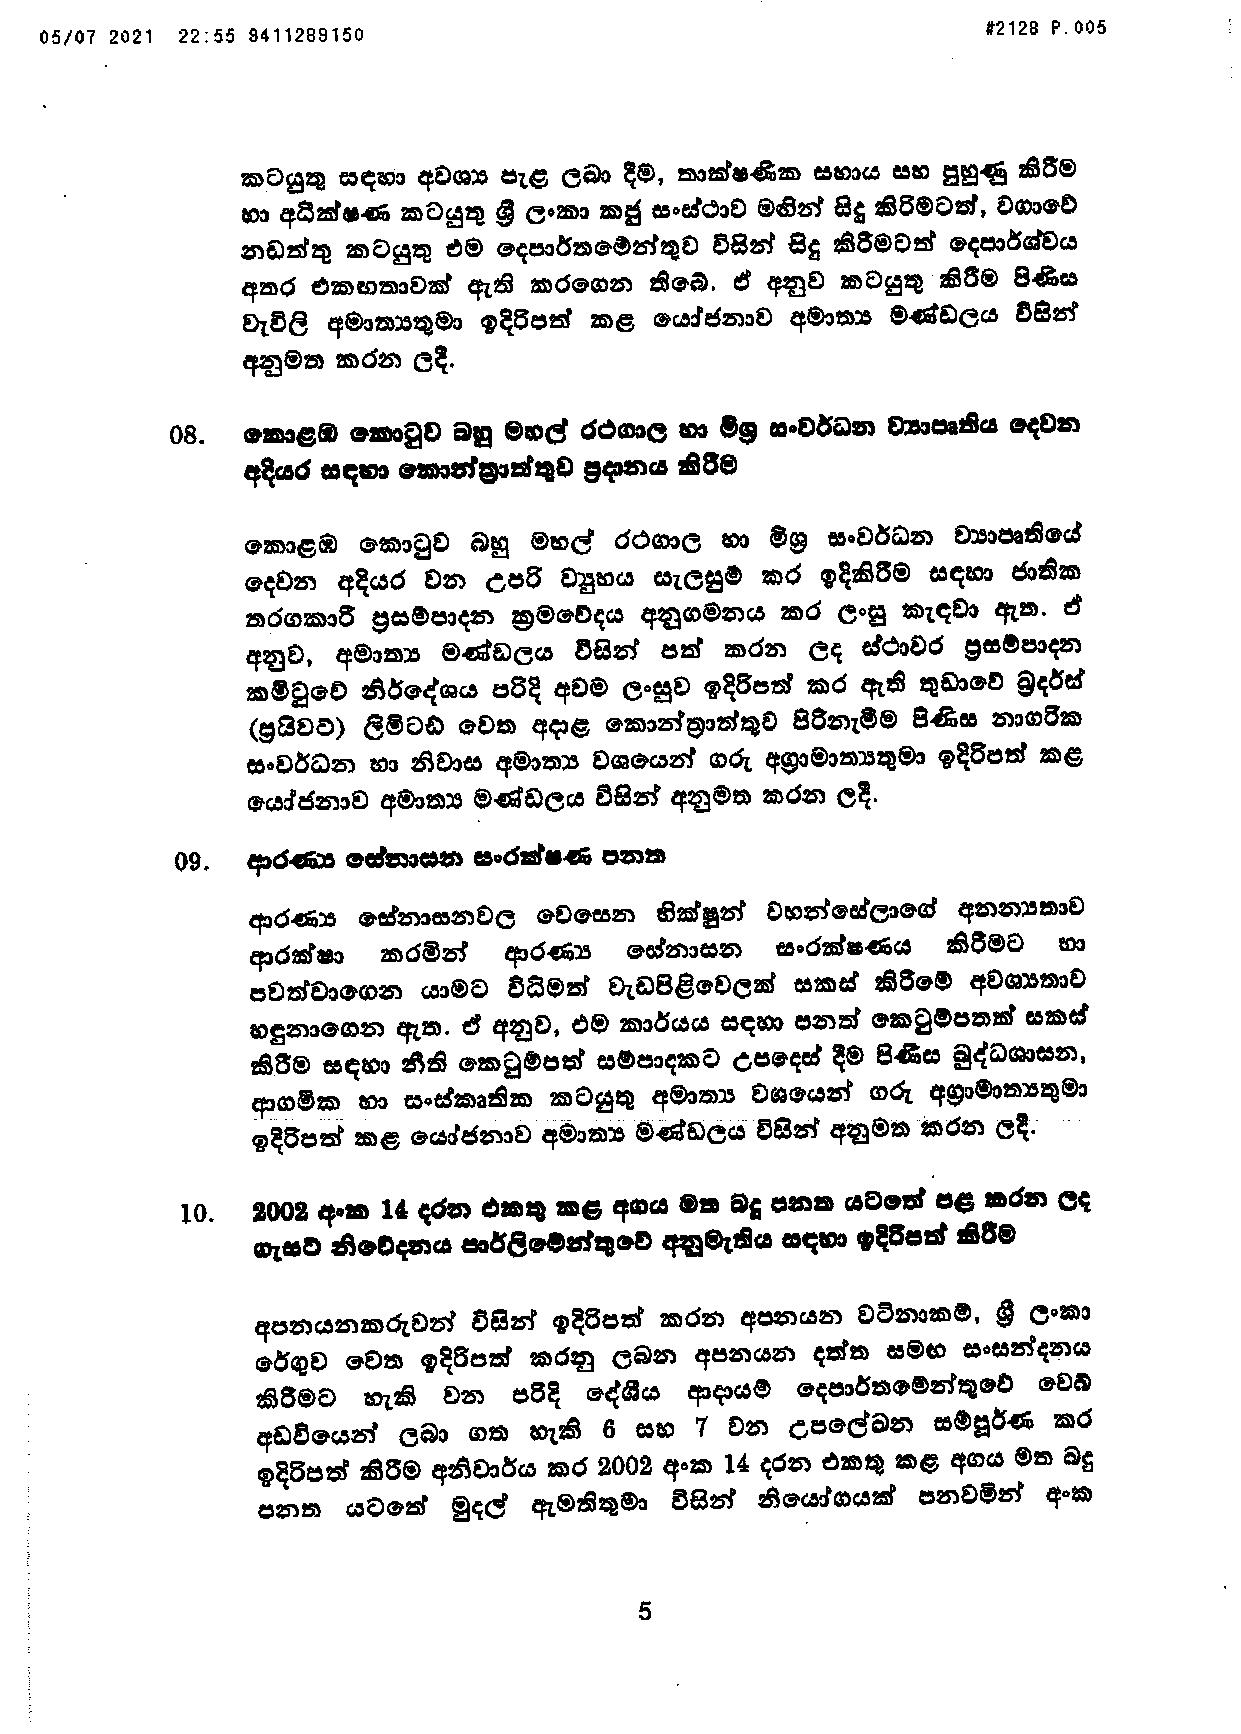 Cabinet Decision on 05.07.2021 page 005